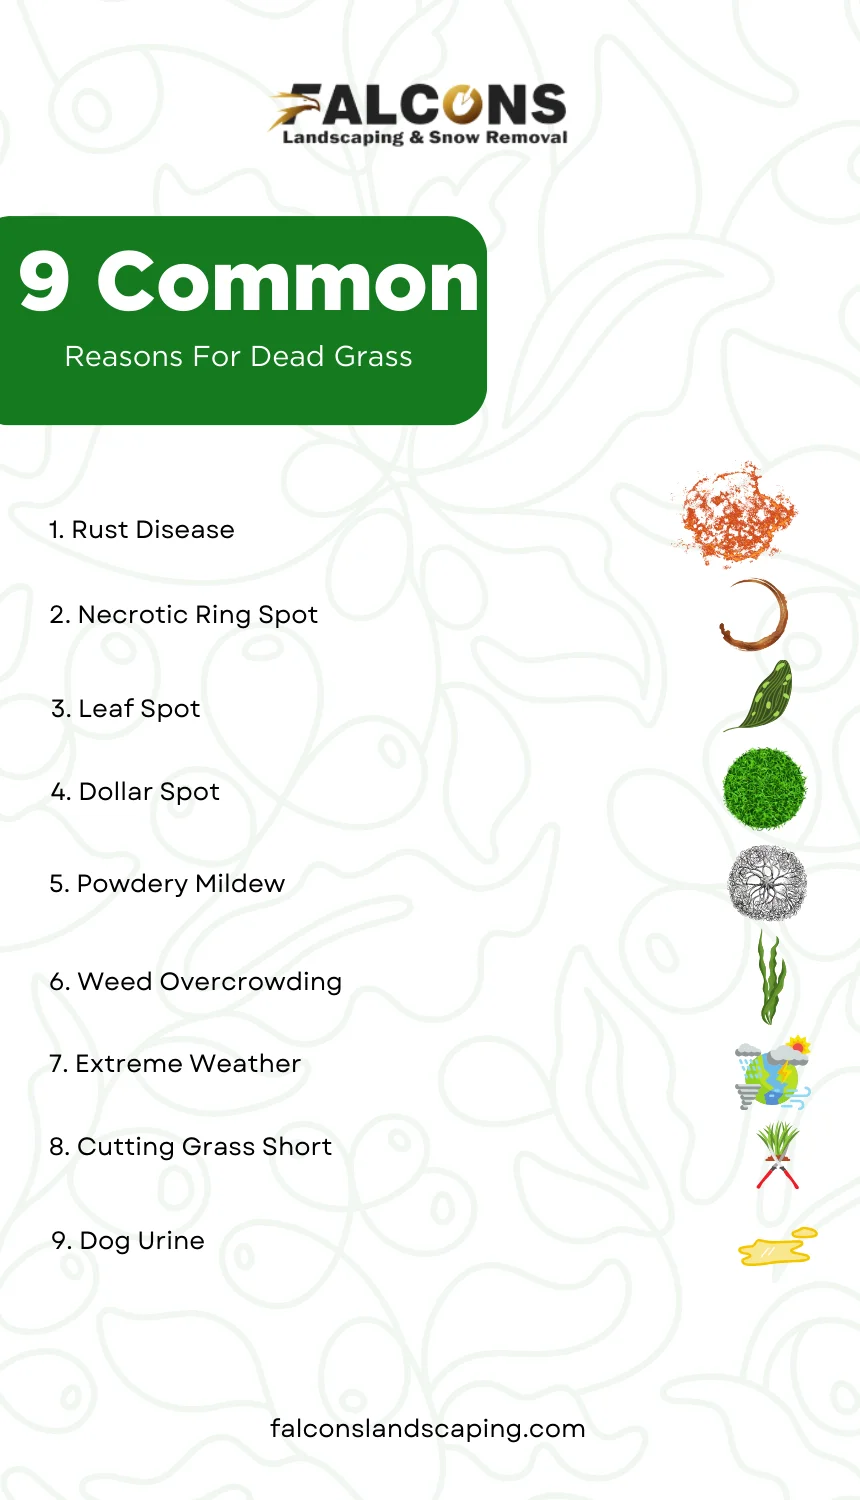 A list of the nine common reasons for dead grass